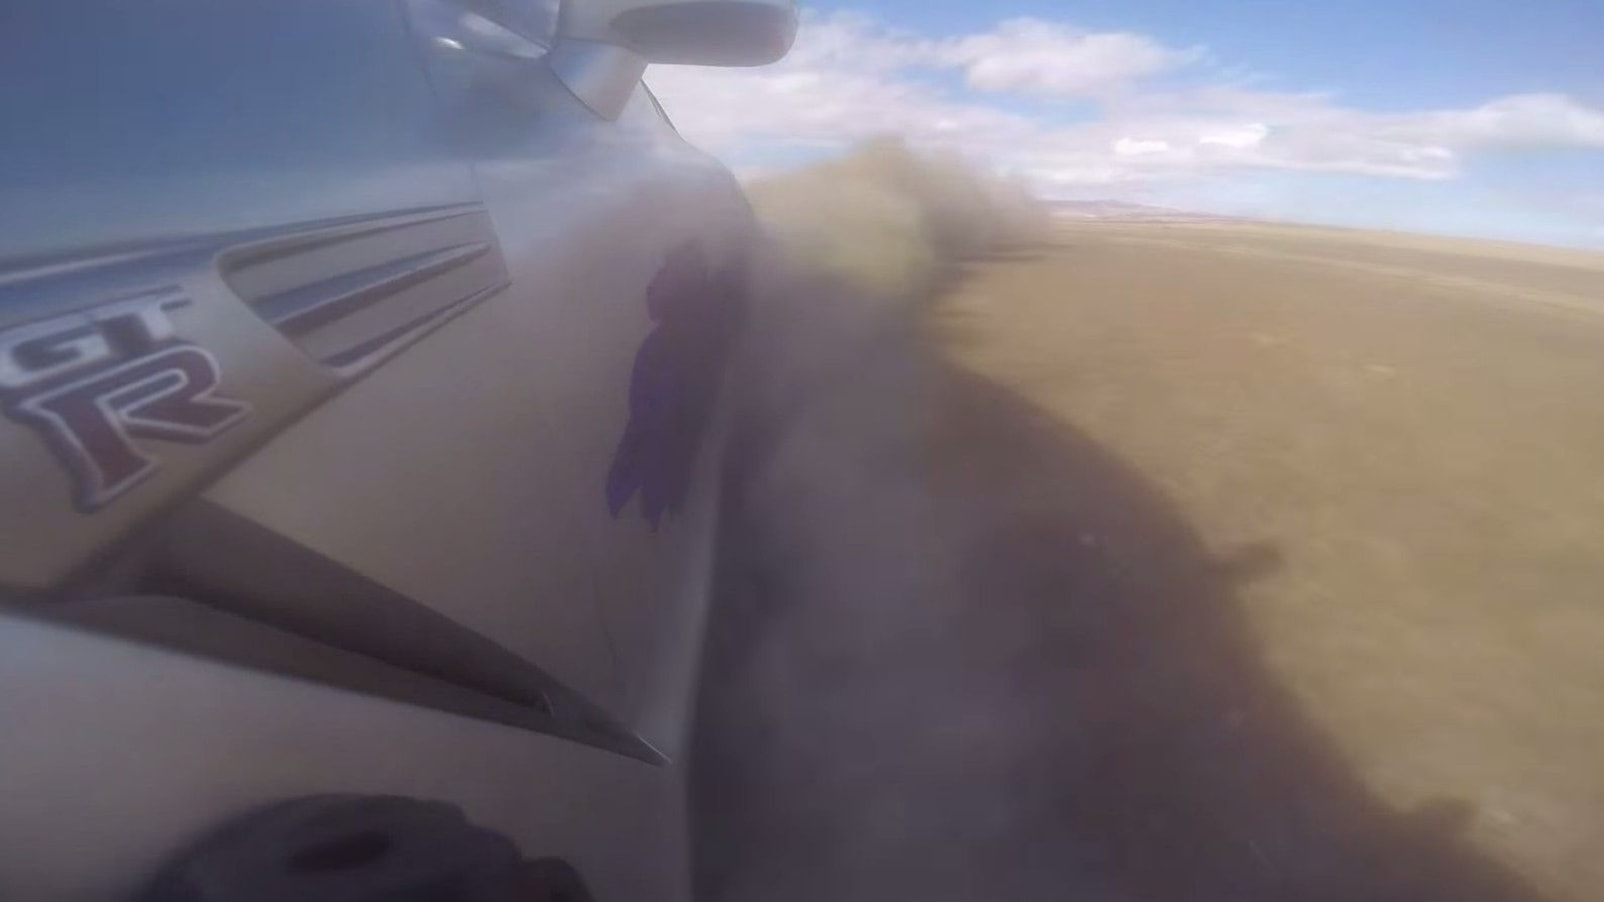 Nissan GT-R spins at 220 mph, escapes unharmed